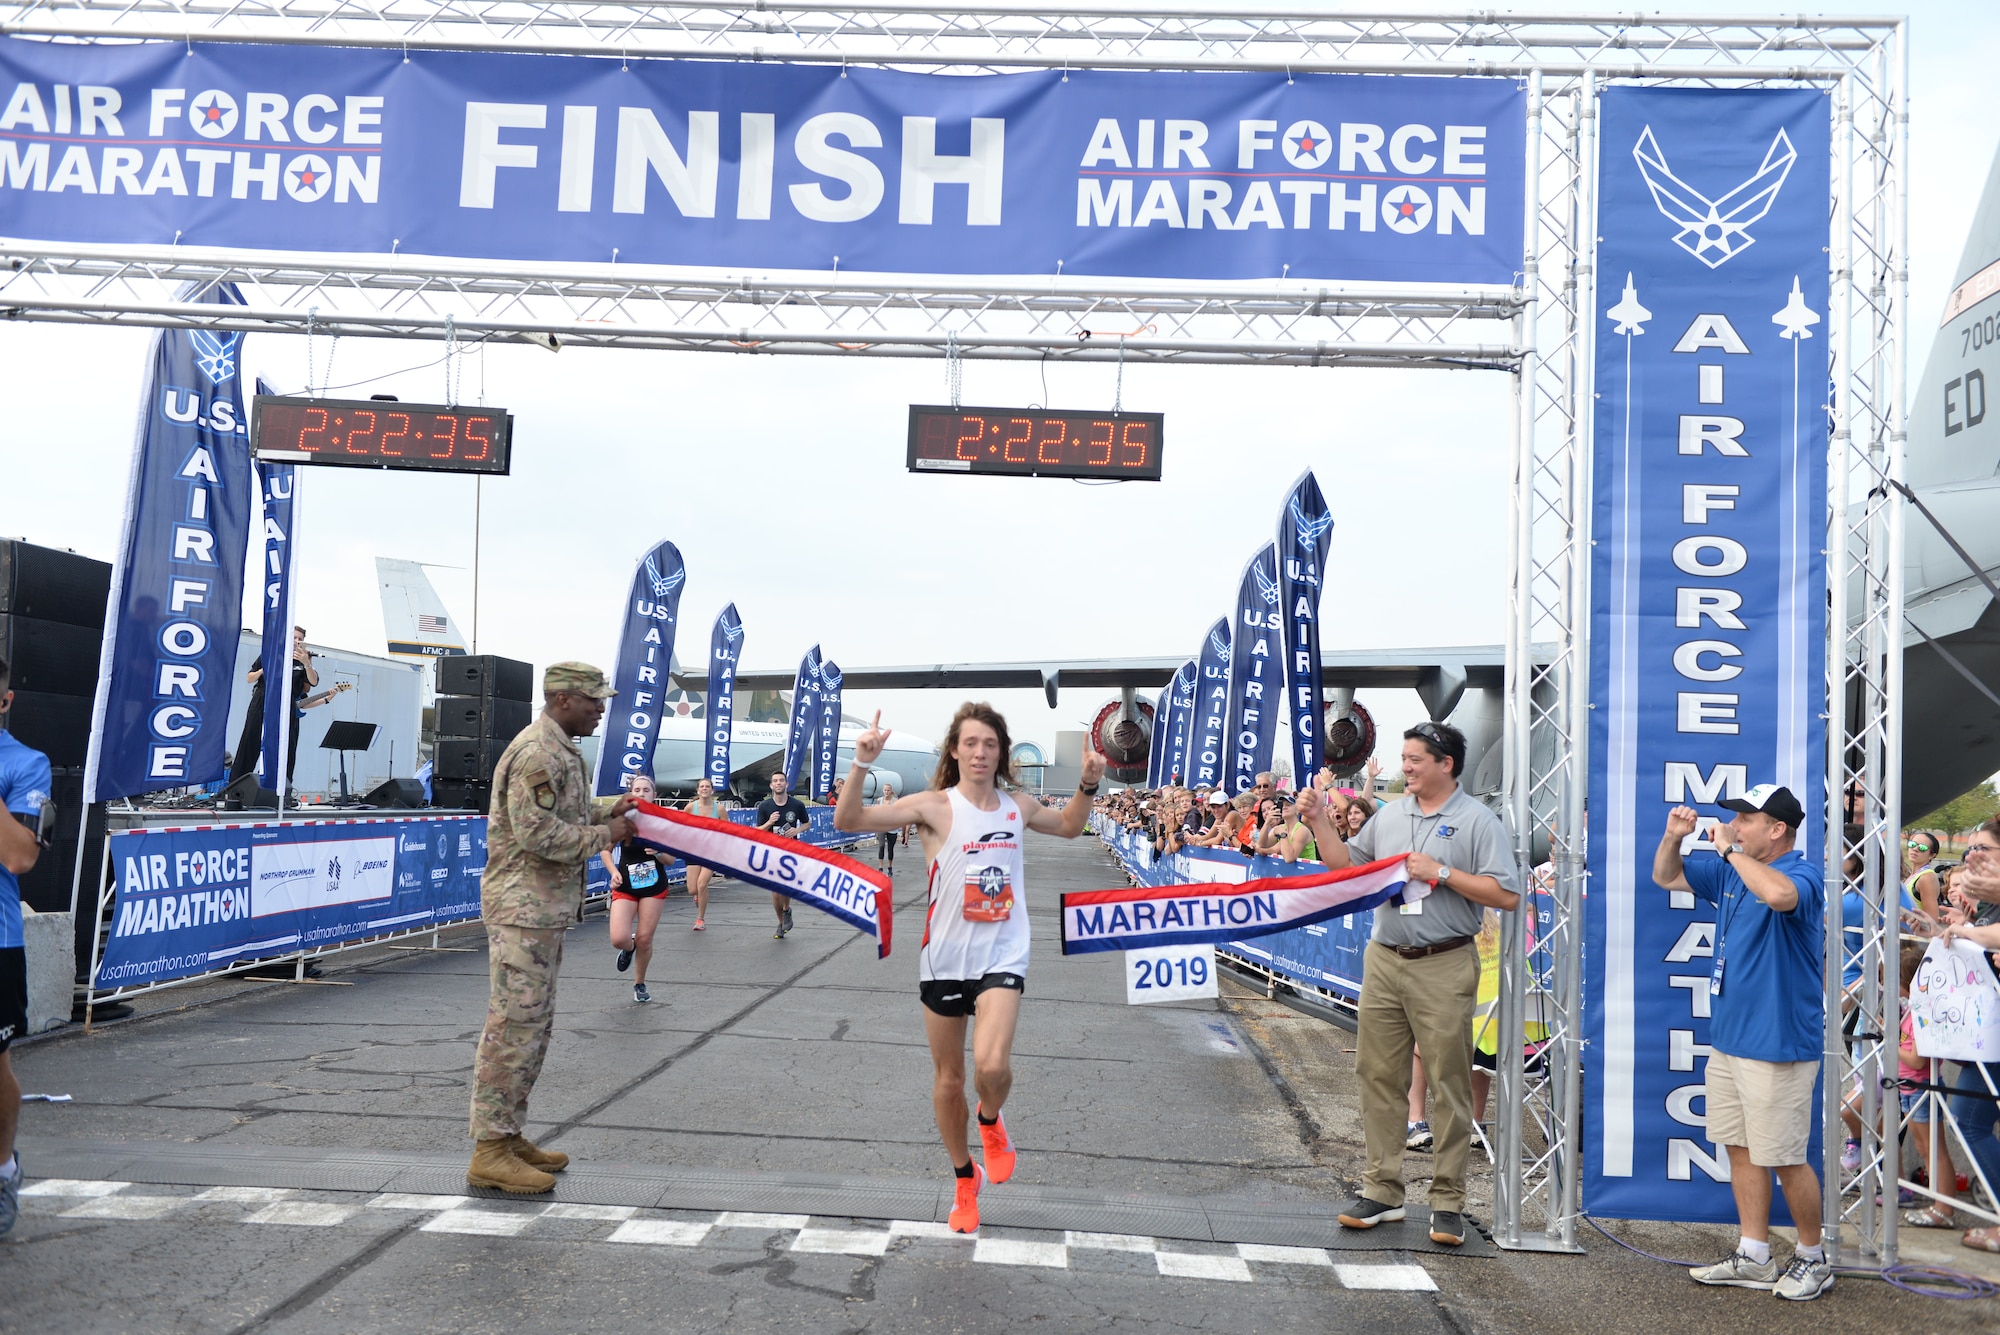 Juris Silenieks, Bath Township, Michigan, crosses the finish line winning the 2019 Air Force Marathon with a time of 2:22:37.  (Air Force photo by Wes Farnsworth)